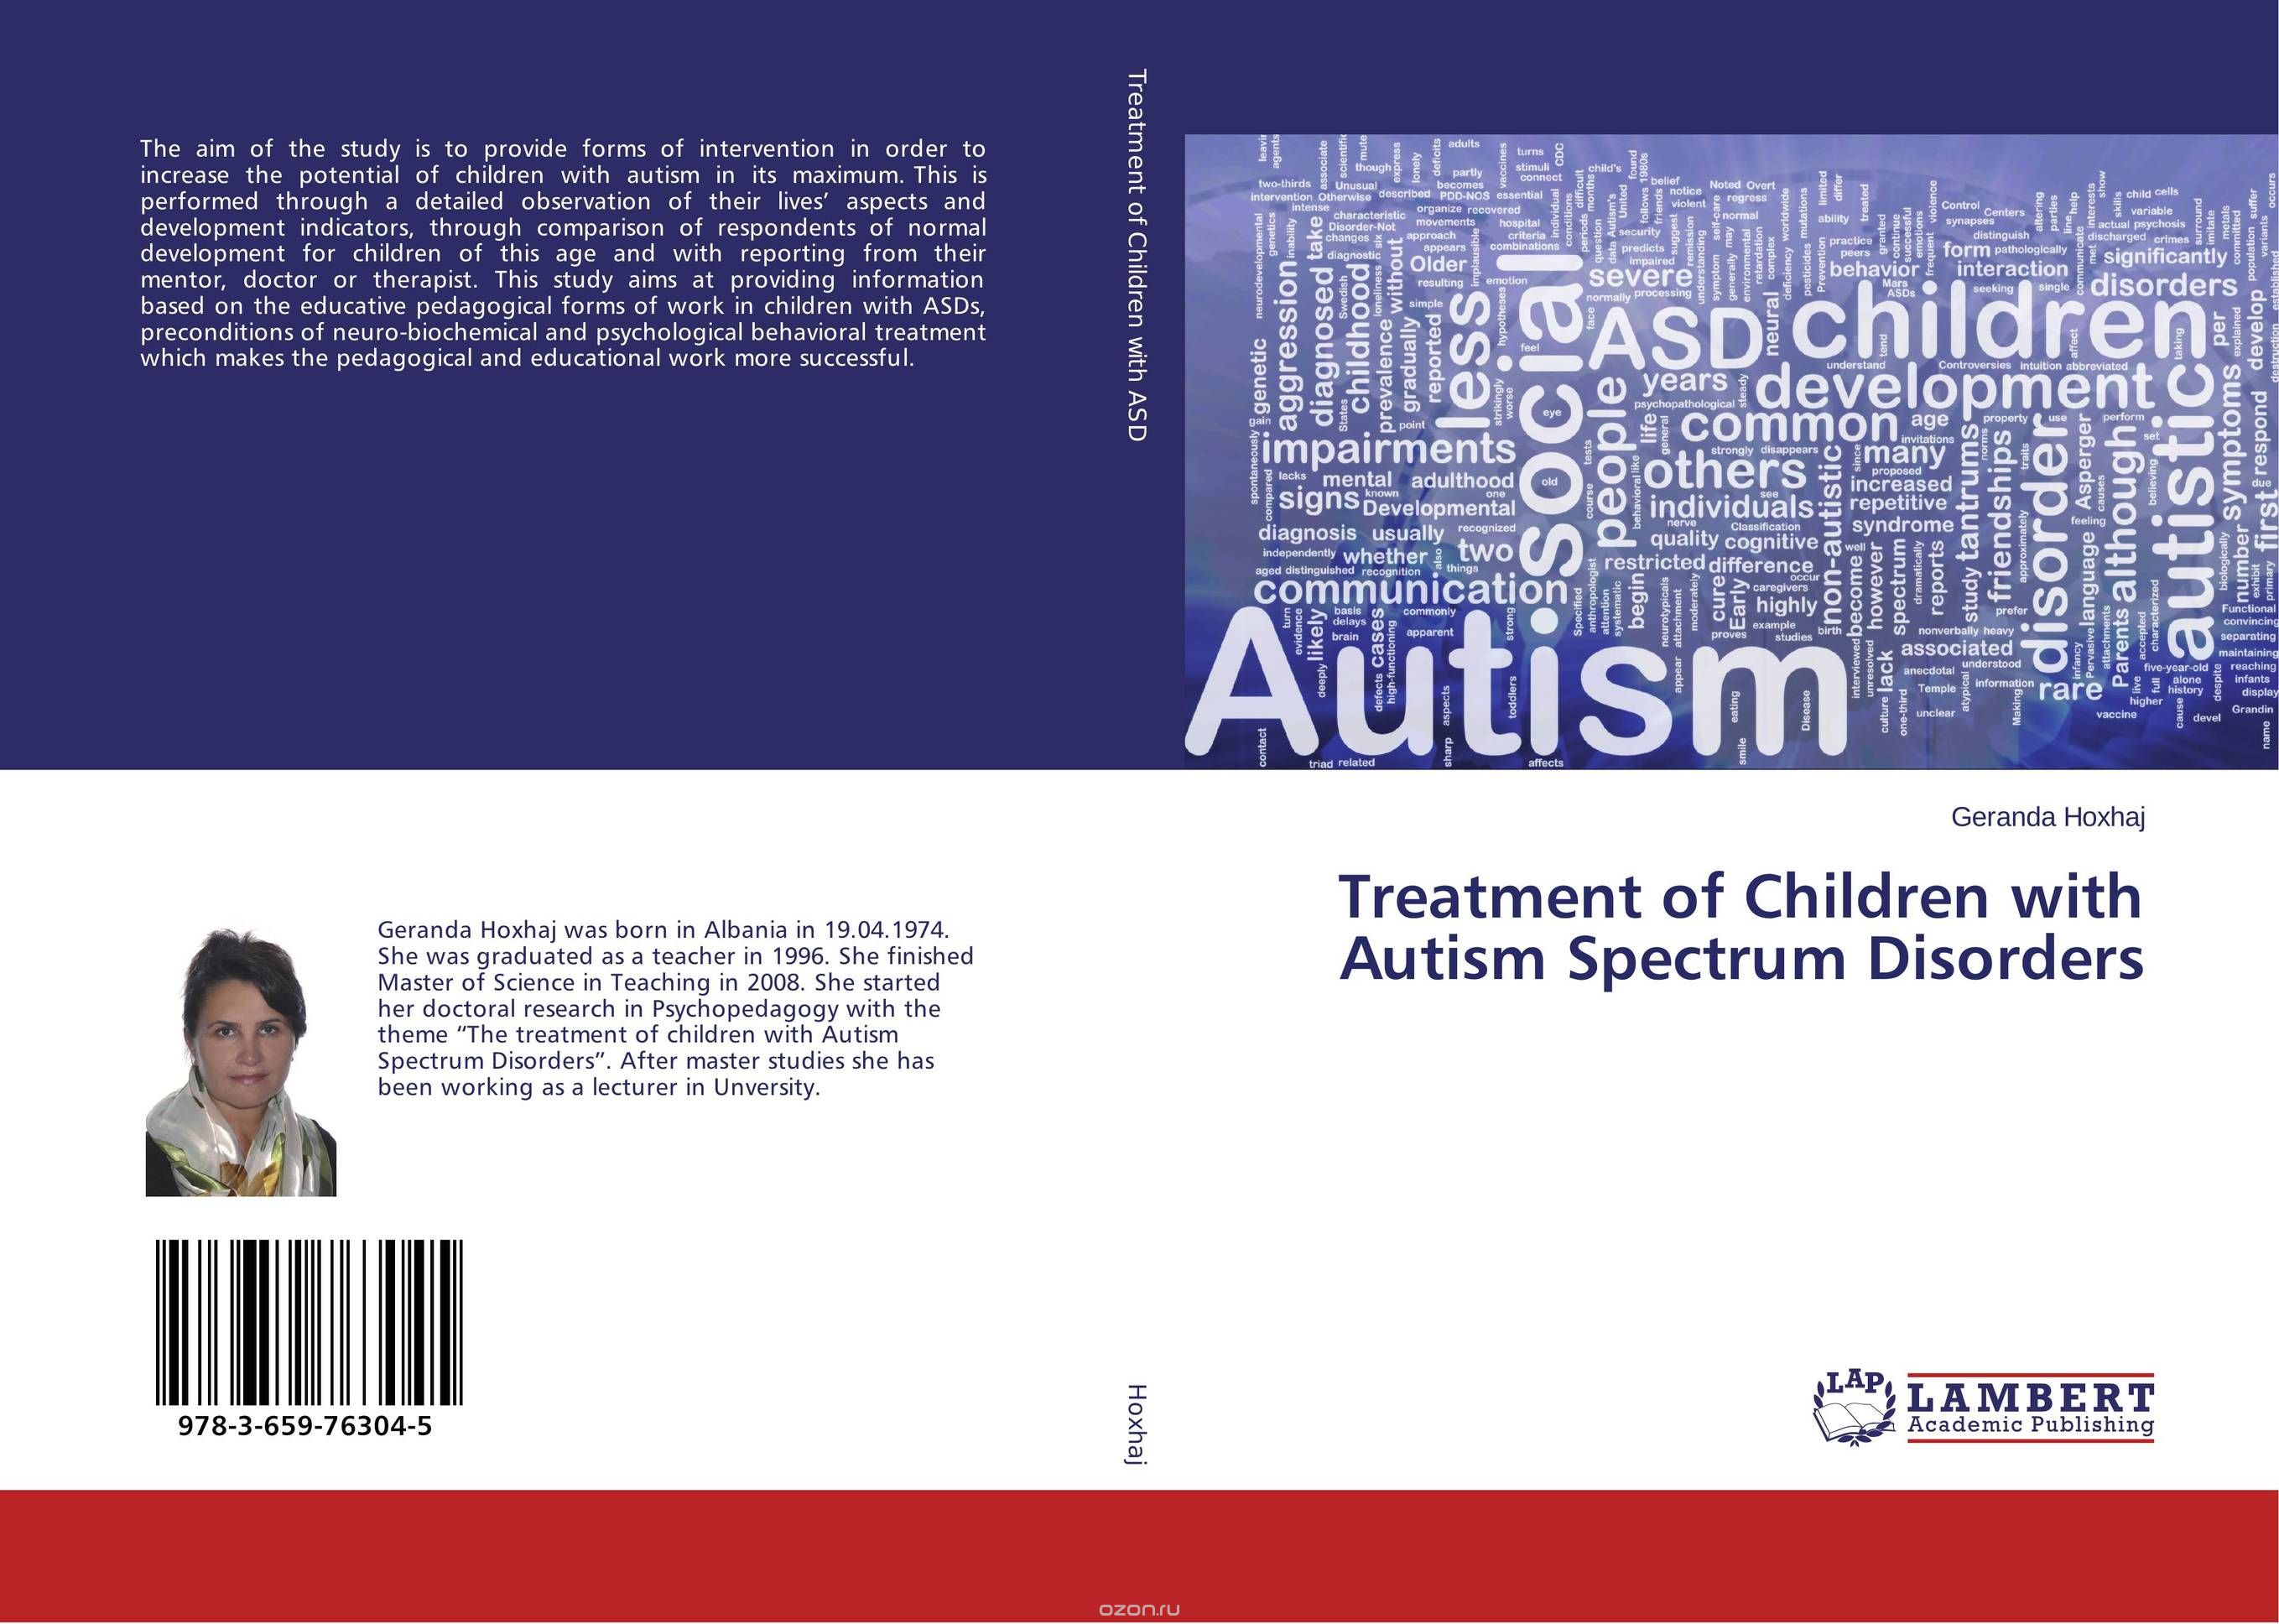 Treatment of Children with Autism Spectrum Disorders